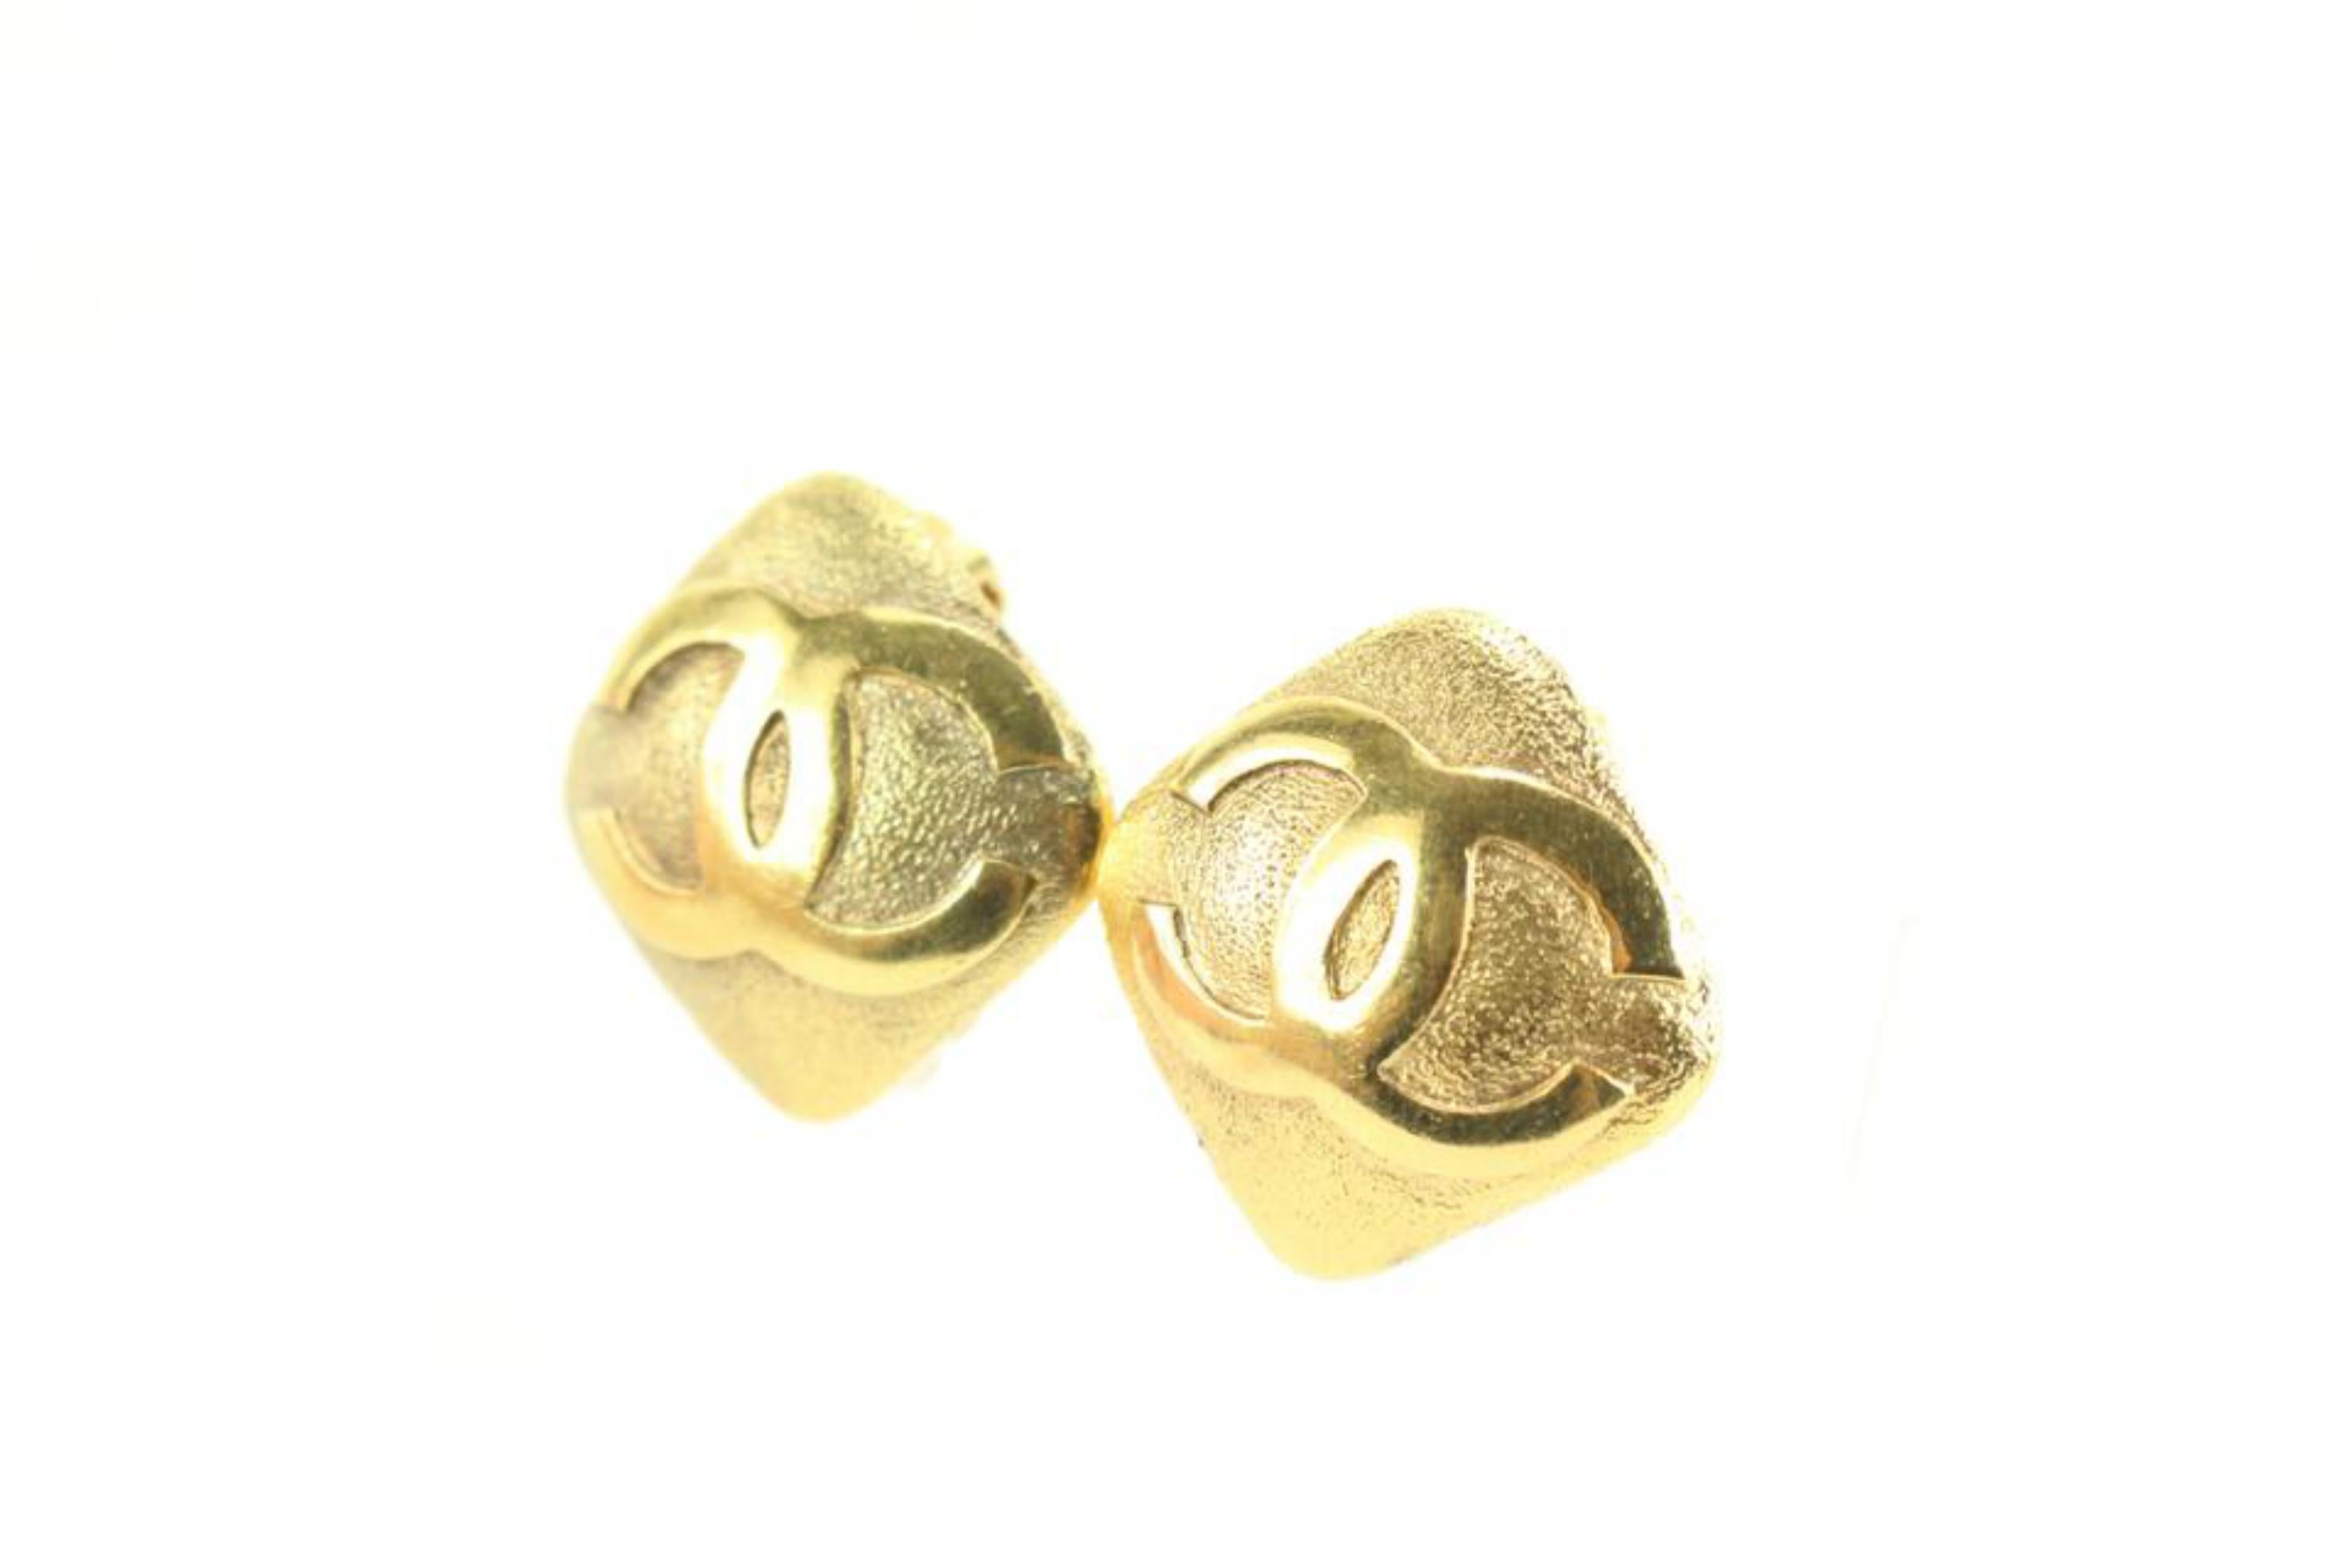 Chanel 29 Series Gold Plated CC Logo Square Diamond Shape Earrings 2cz616s In Good Condition In Dix hills, NY